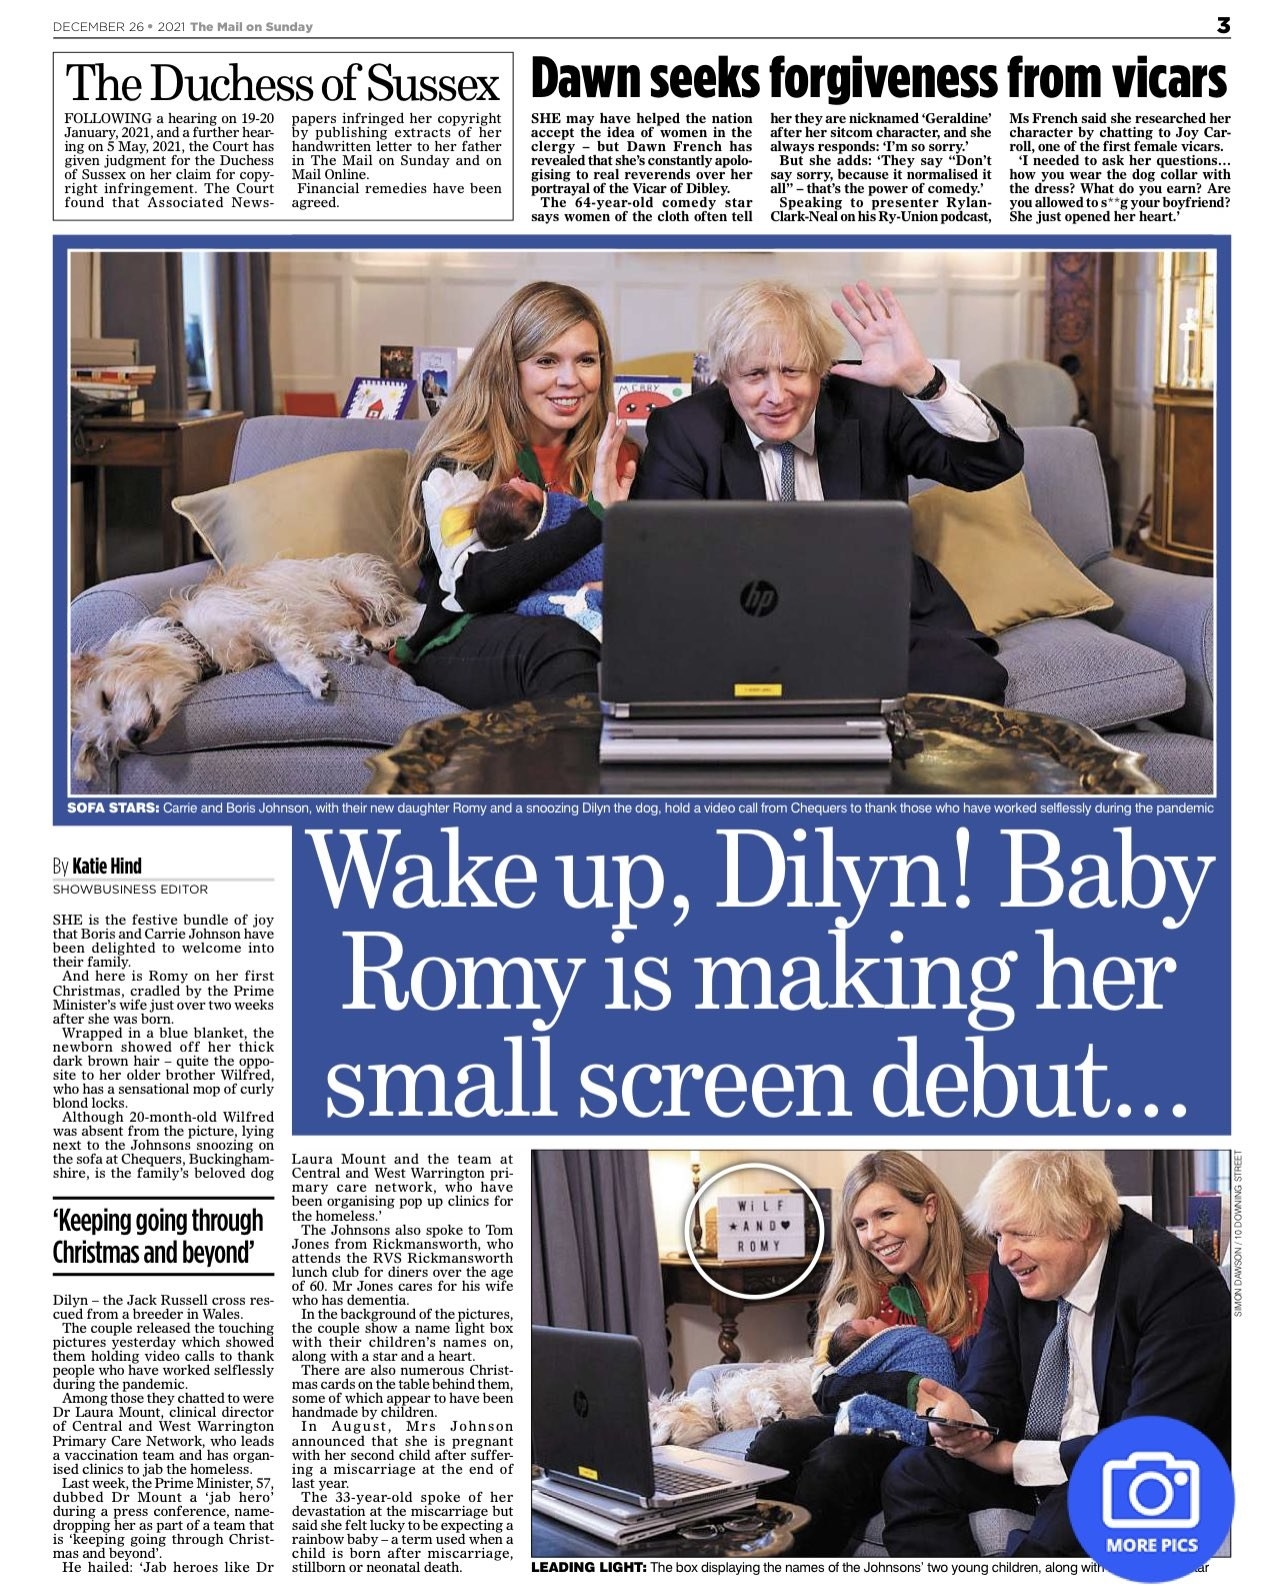 Newspaper page with small item with &quot;The Duchess of Sussex&quot; headline